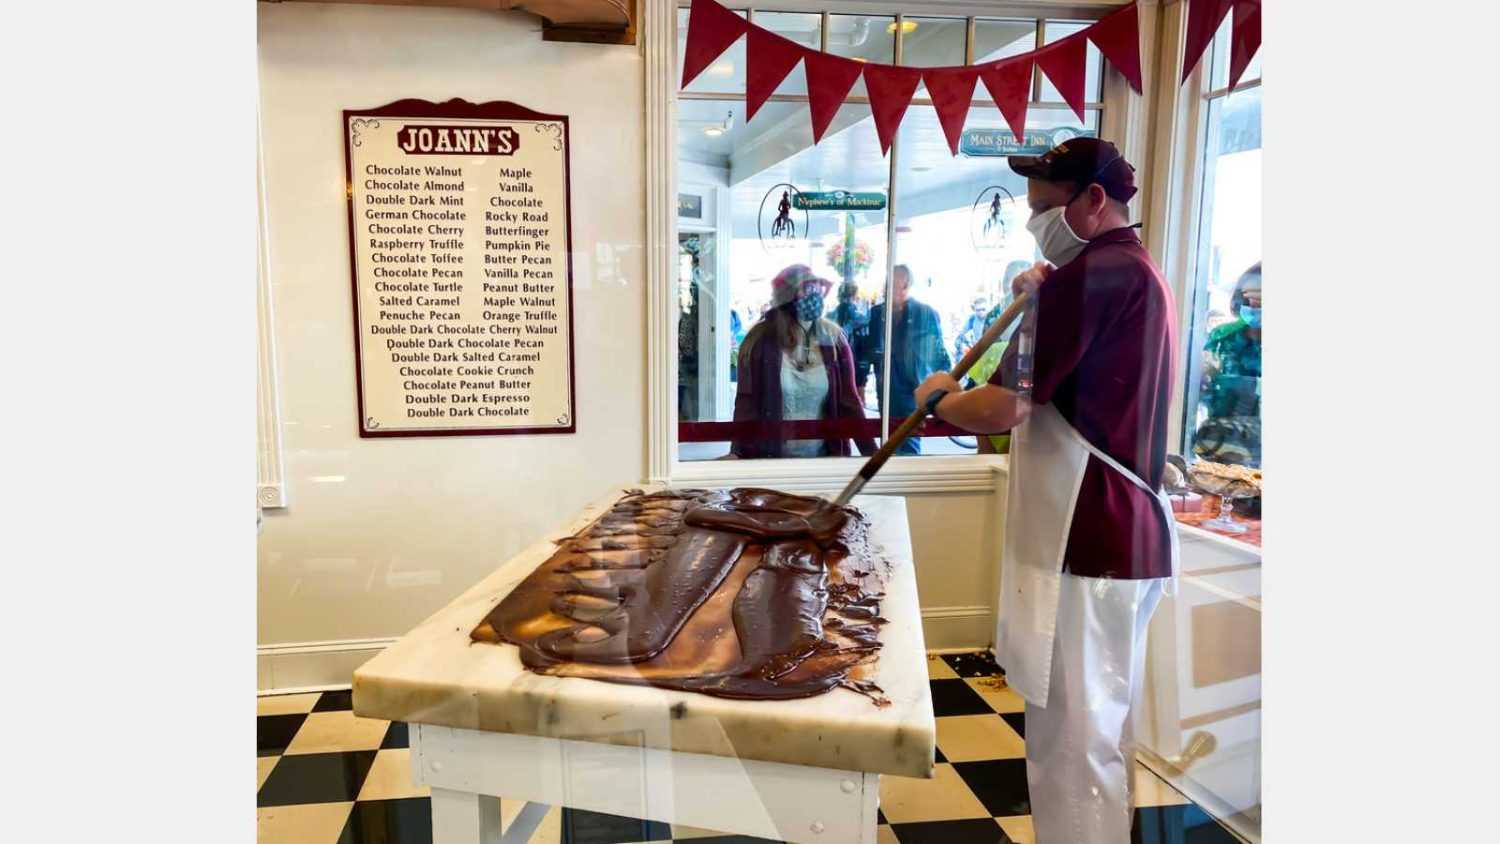 MACKINAC ISLAND, MI, USA- September 6, 2020: A worker paddles the fudge and preparing fresh fudge in shop of downtown Mackinac Island, MI. Fudge is one of the biggest products sold on the island.